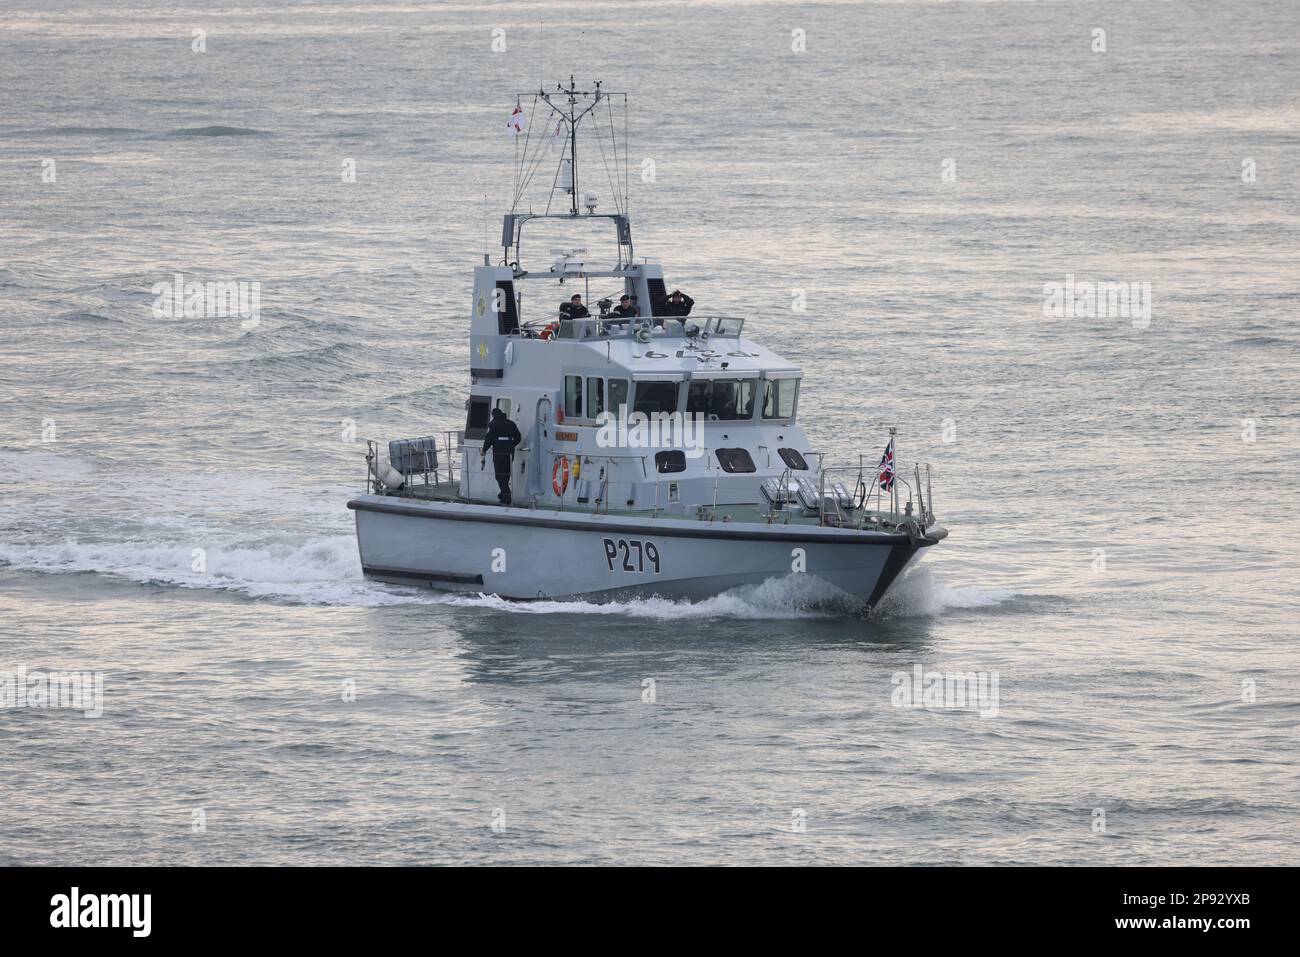 The Royal Navy fast training boat HMS BLAZER (P279) arriving at the Naval Base Stock Photo